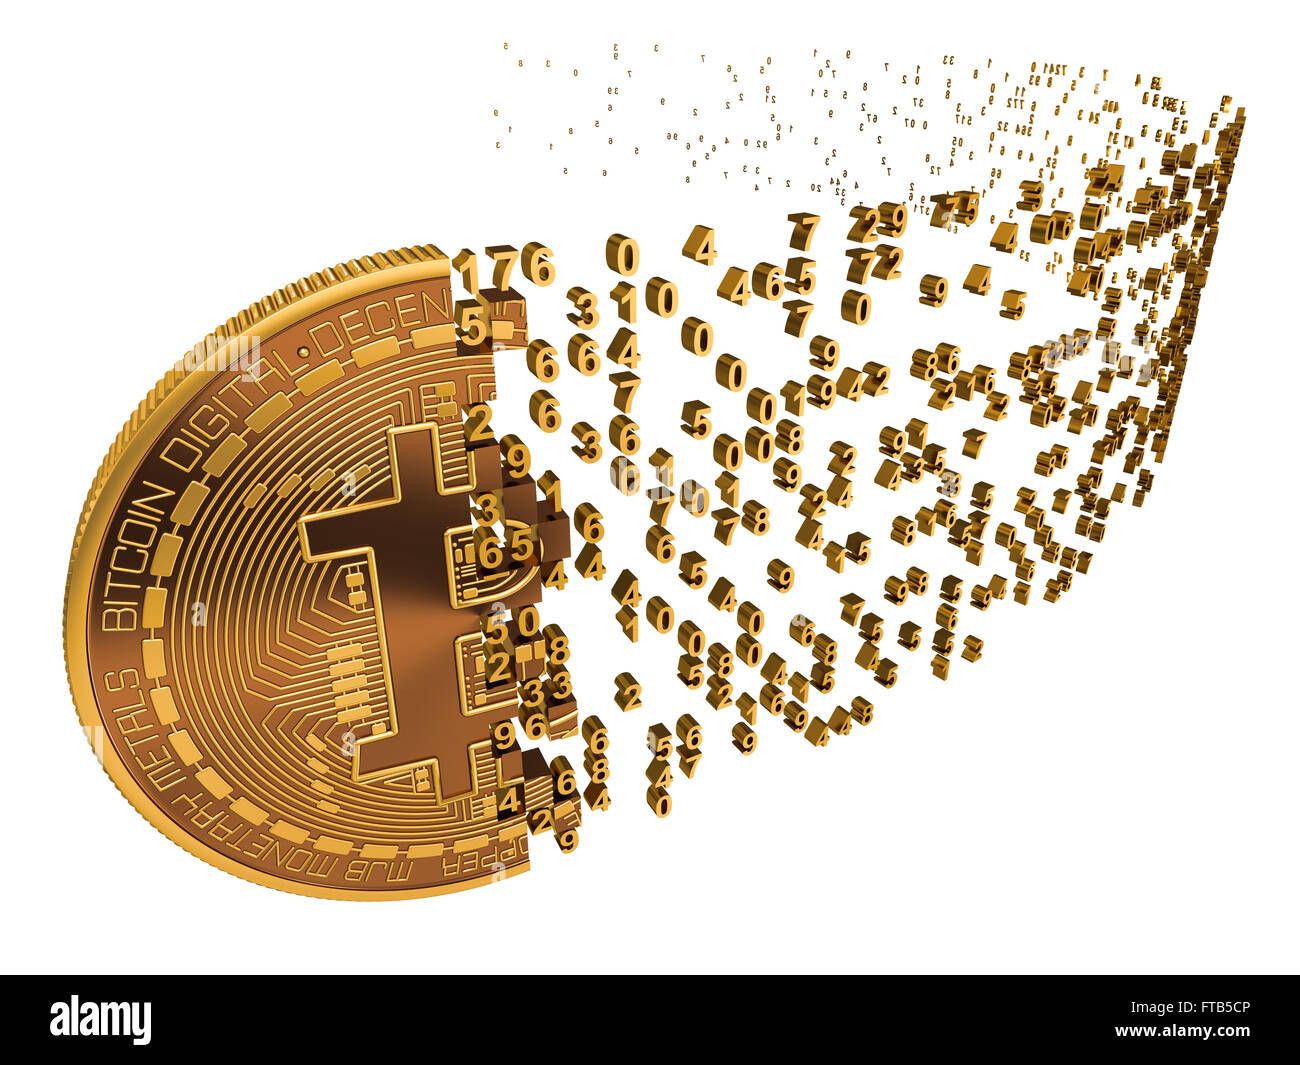 Bitcoin Falling Apart To Digits On White Background. 3D Model. Stock Photo